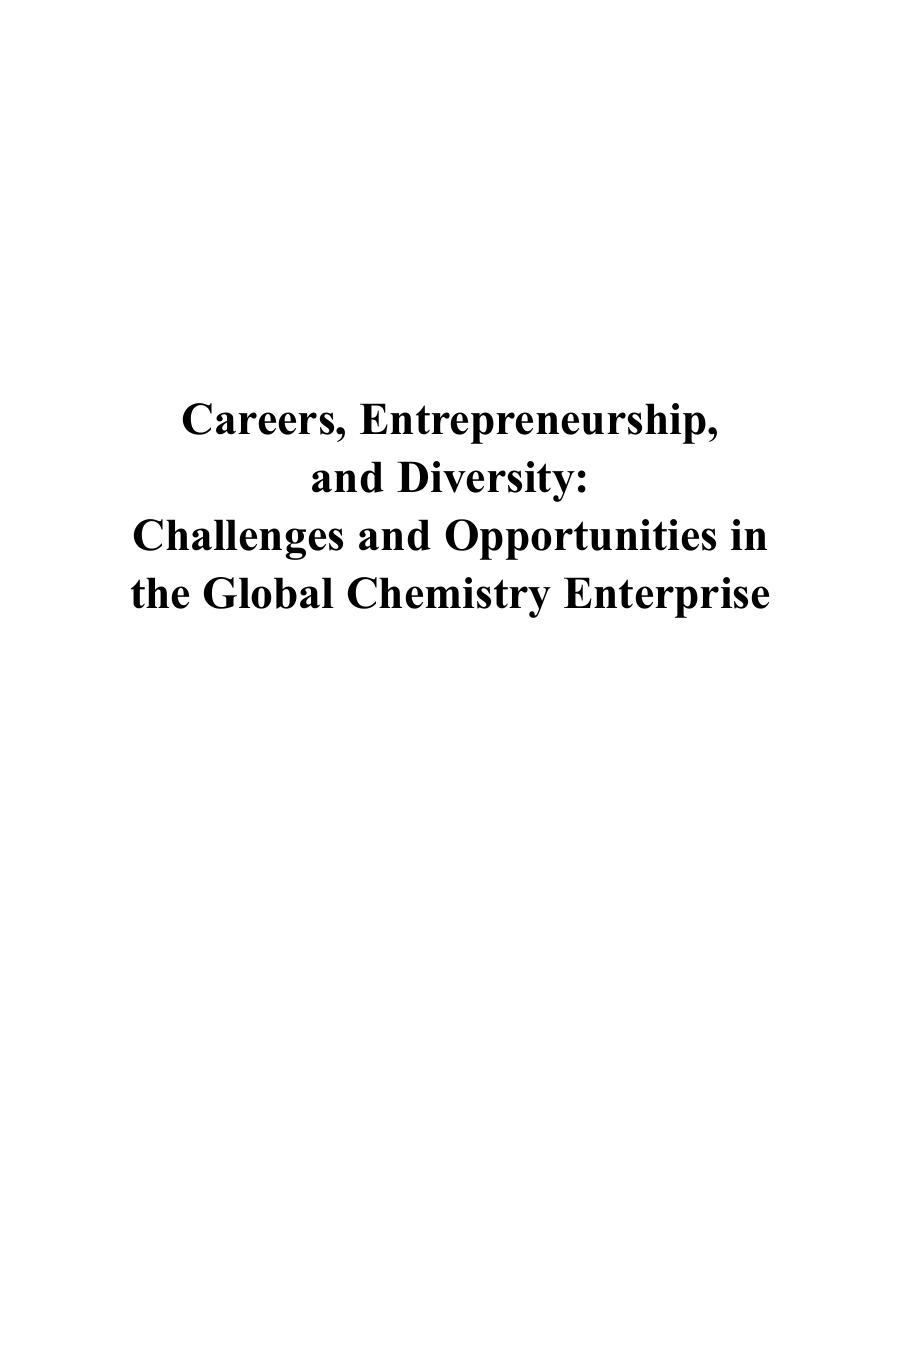 1169. Careers, Entrepreneurship, and Diversity by Challenges & Opportunities in the Global Chemistry Enterprise (2014)